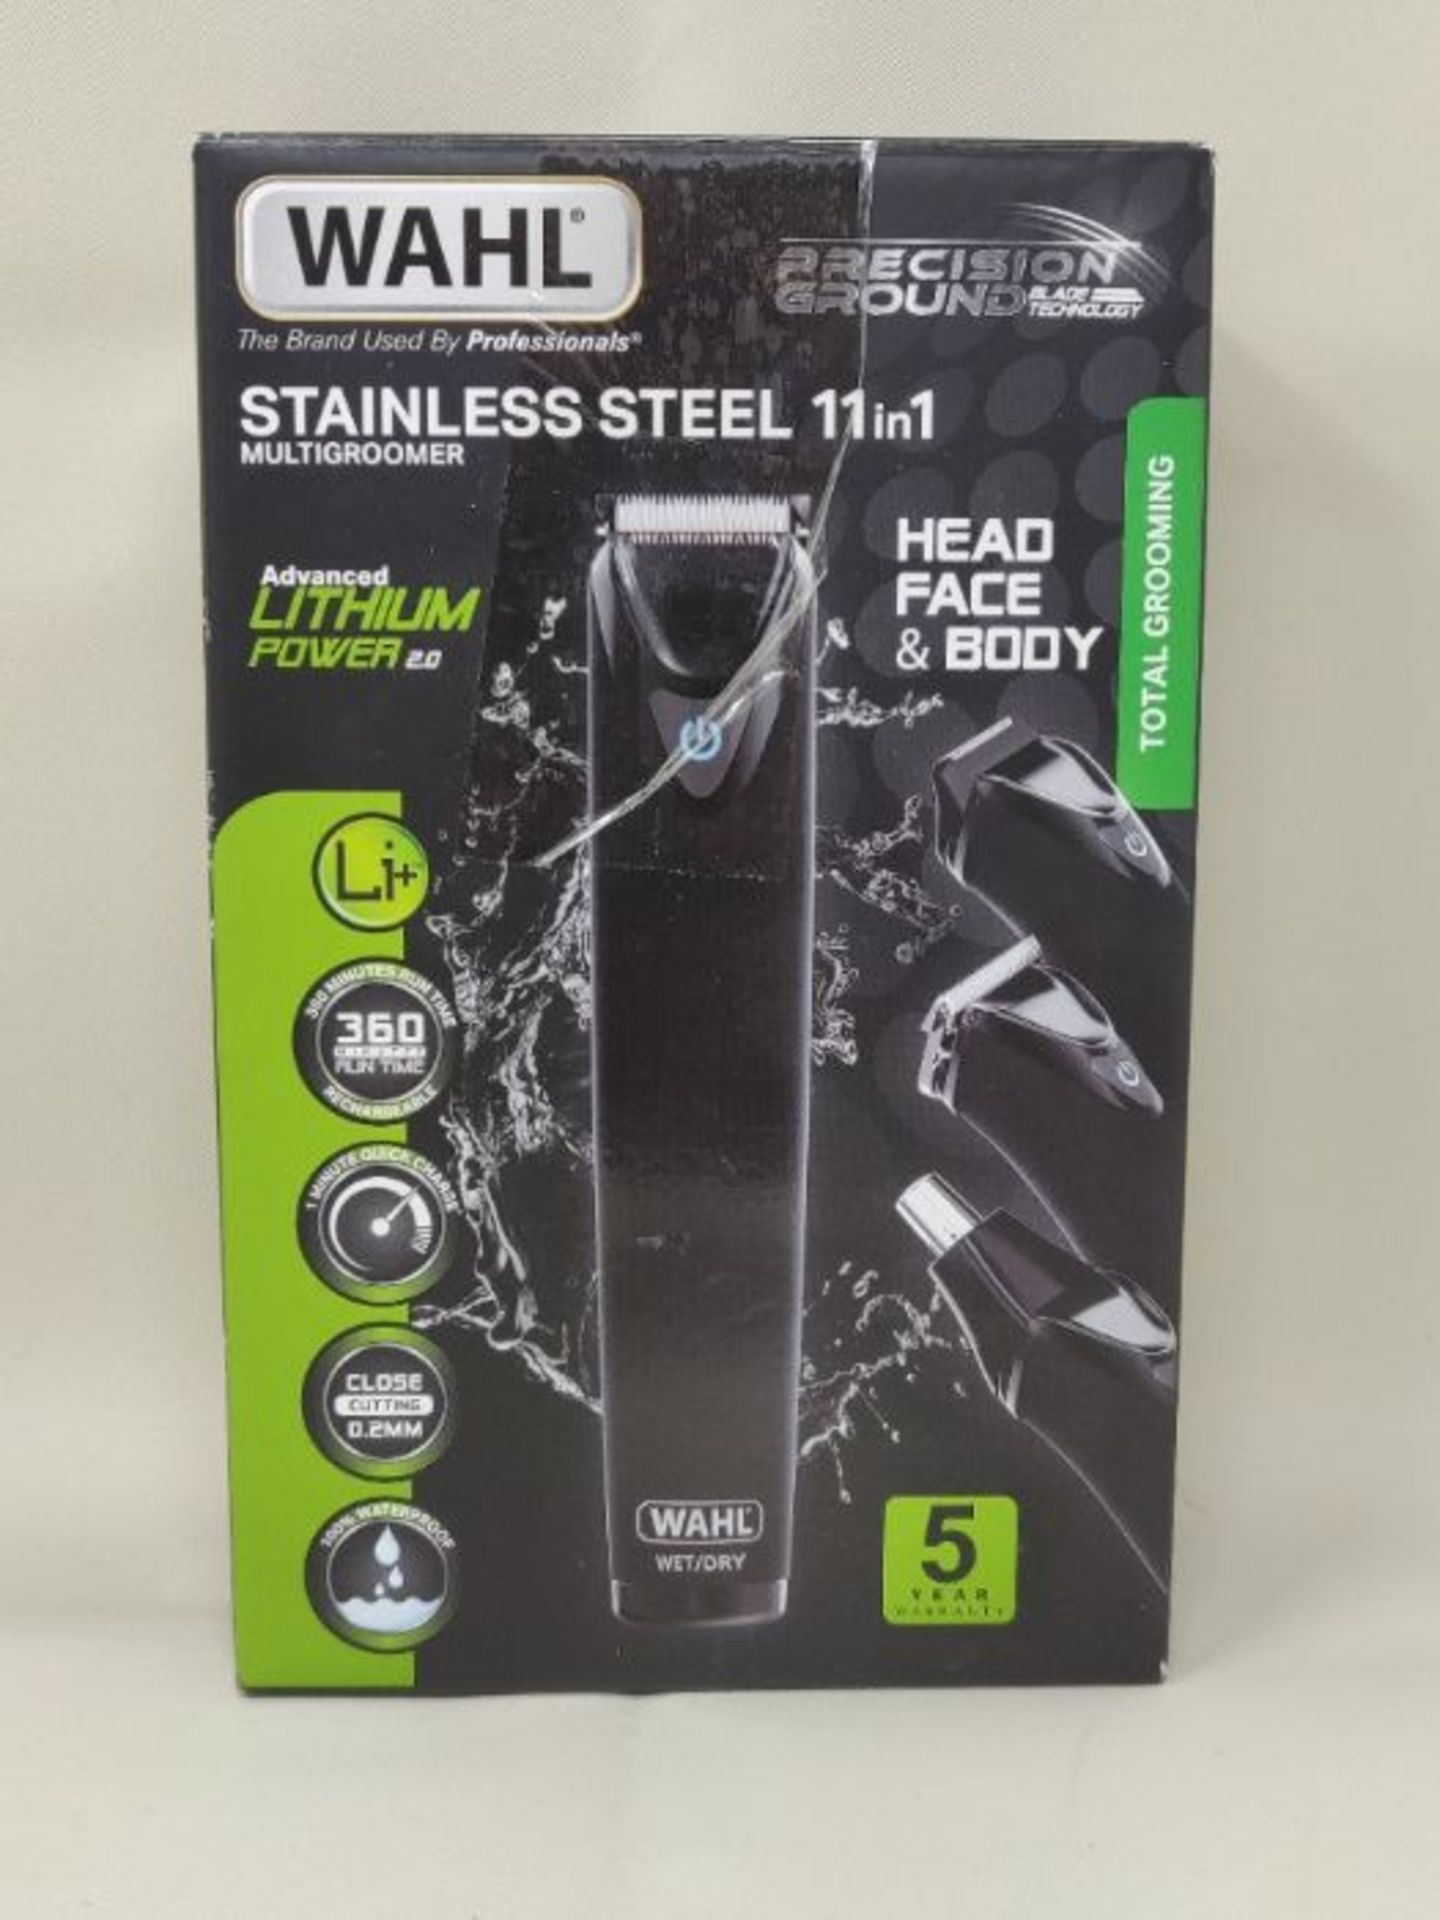 RRP £94.00 [INCOMPLETE] WAHL Multigroomer, Black Stainless Steel, Cordless, Rechargeable, Fully W - Image 2 of 3